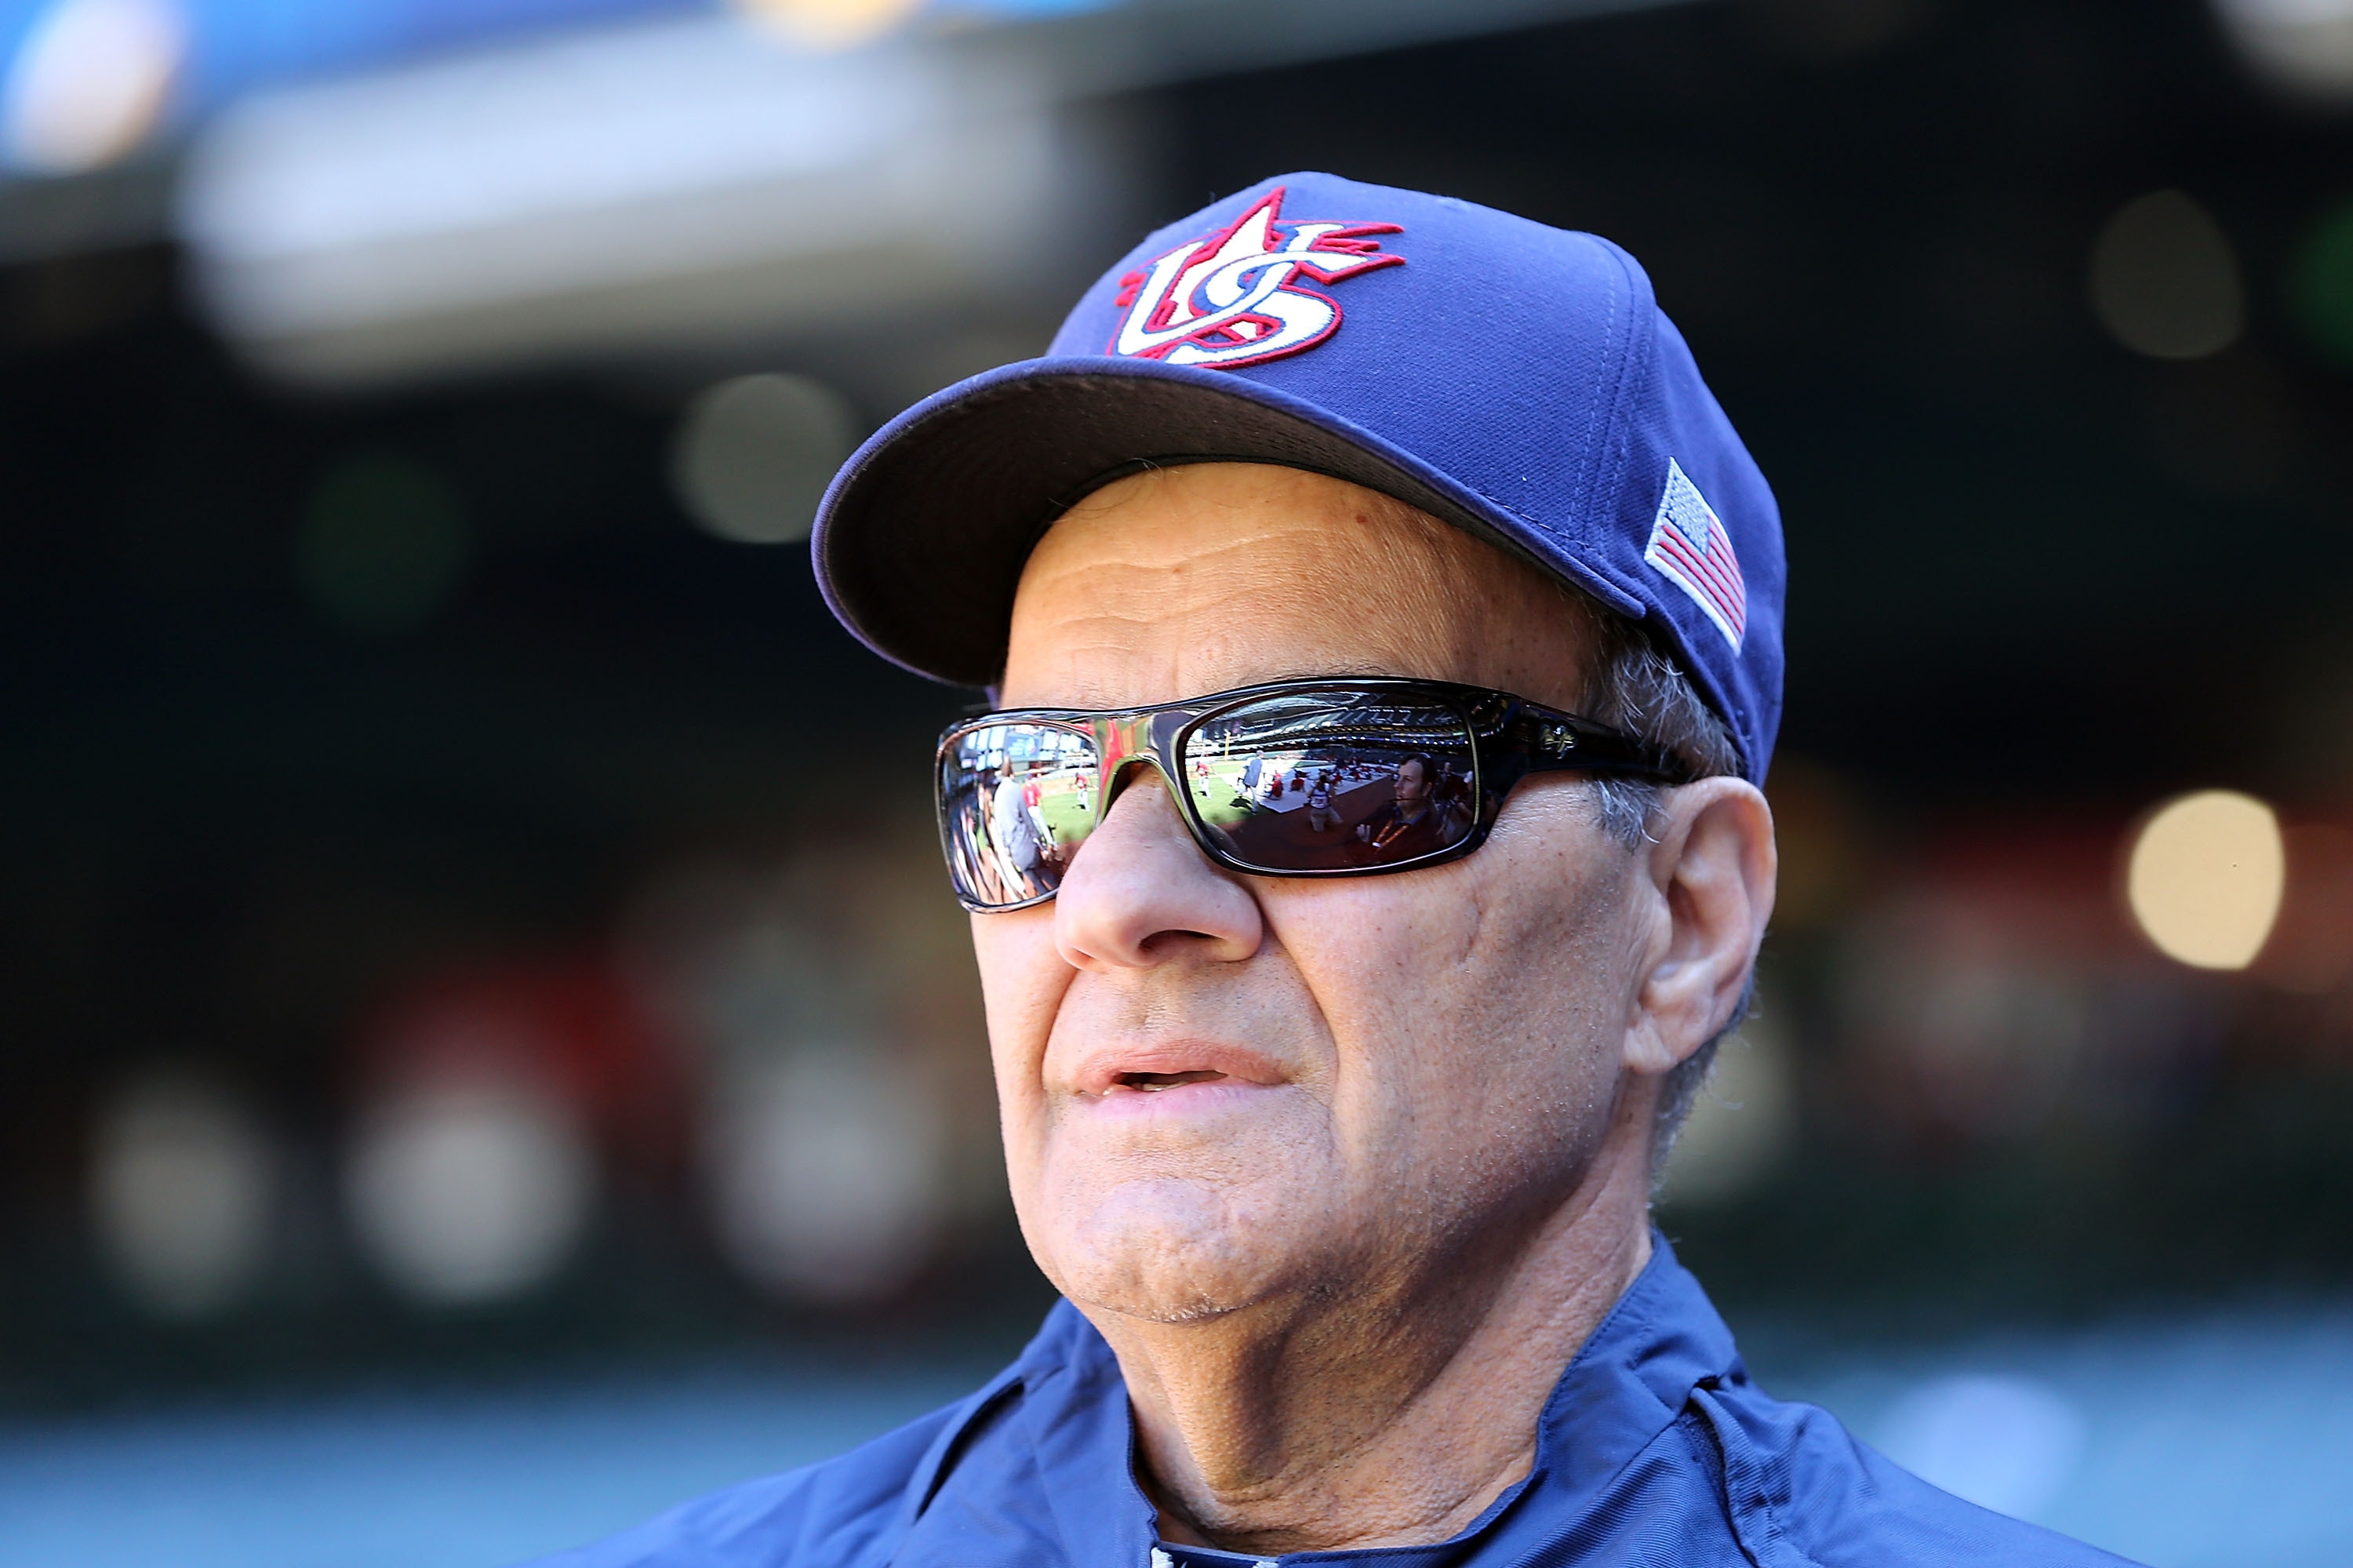 Joe Torre's daughter catches falling infant